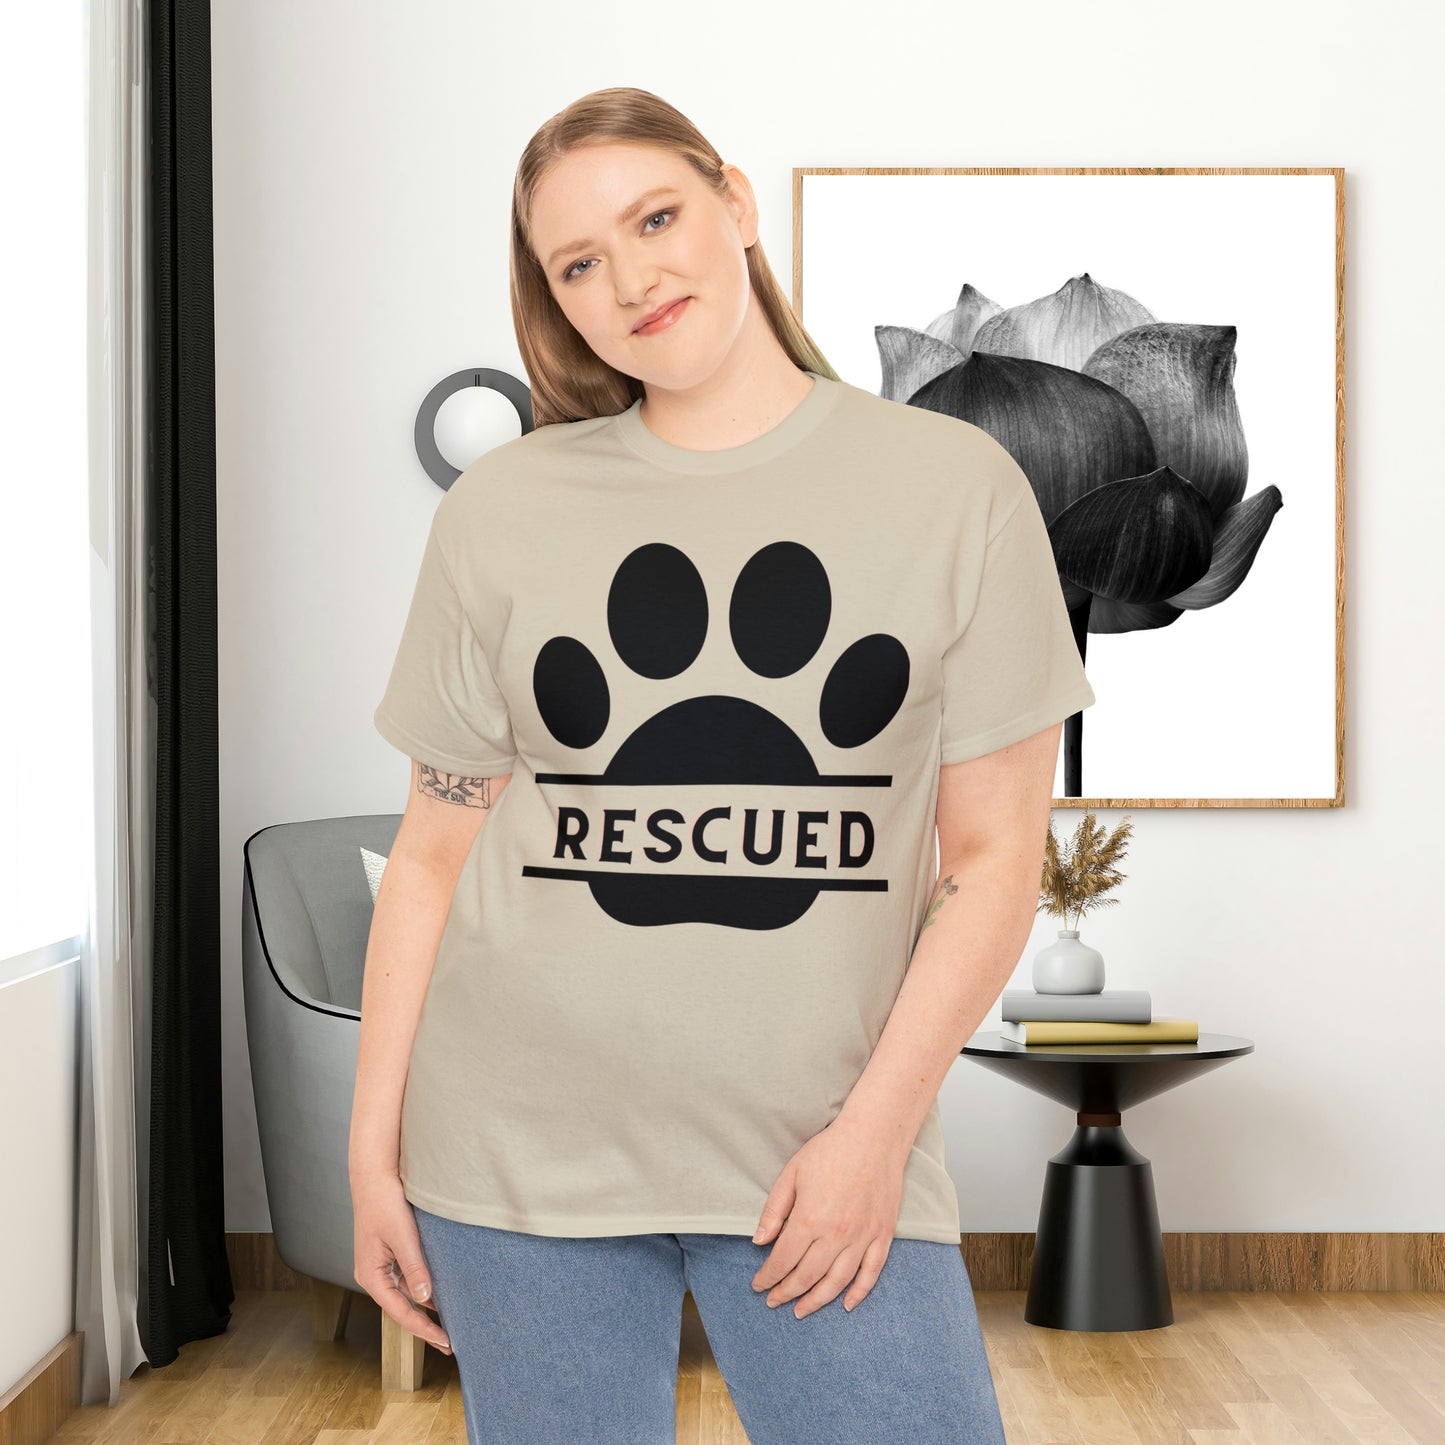 Rescue a furry friend and you will know unconditional love. This Unisex Heavy Cotton Tee is testament to what every dog or cat “rescuer” knows.